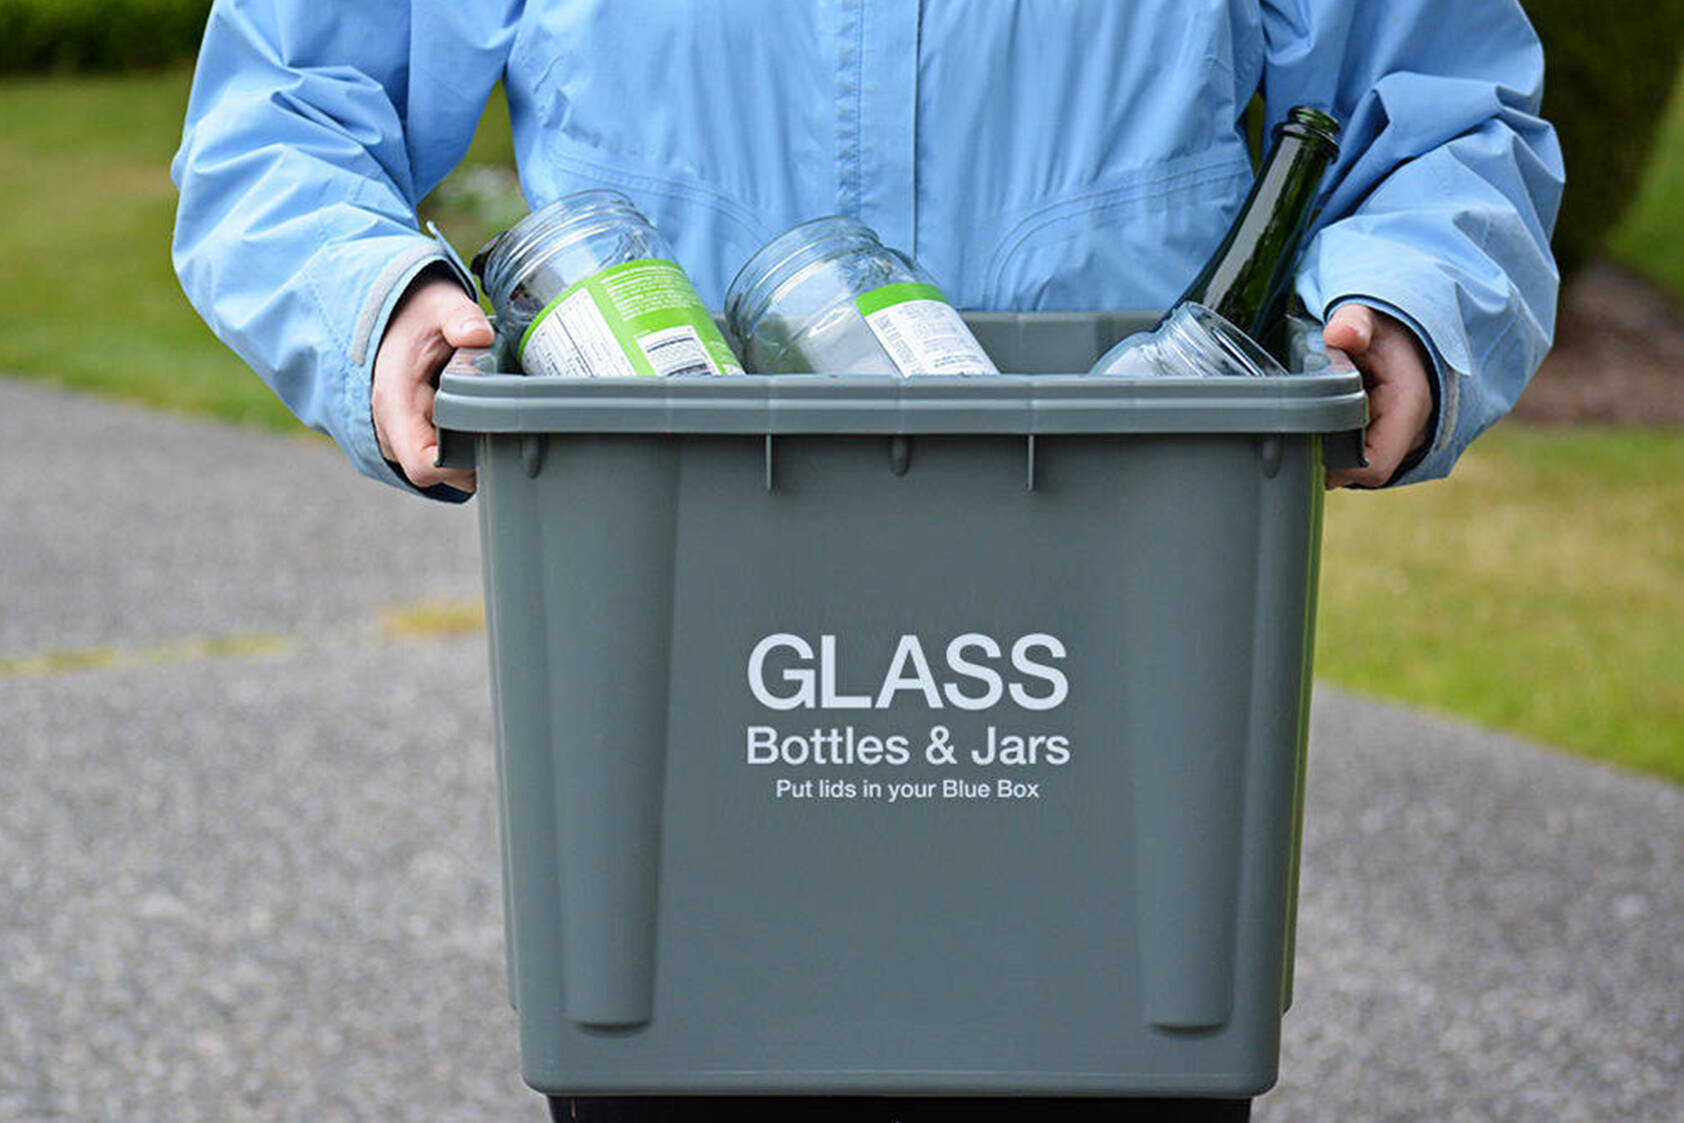 While it's not out of the realm of possibility, Salmon Arm currently has no plan to add glass to its curbside recycling collection program such as what recently rolled out in the North Okanagan. (File photo)